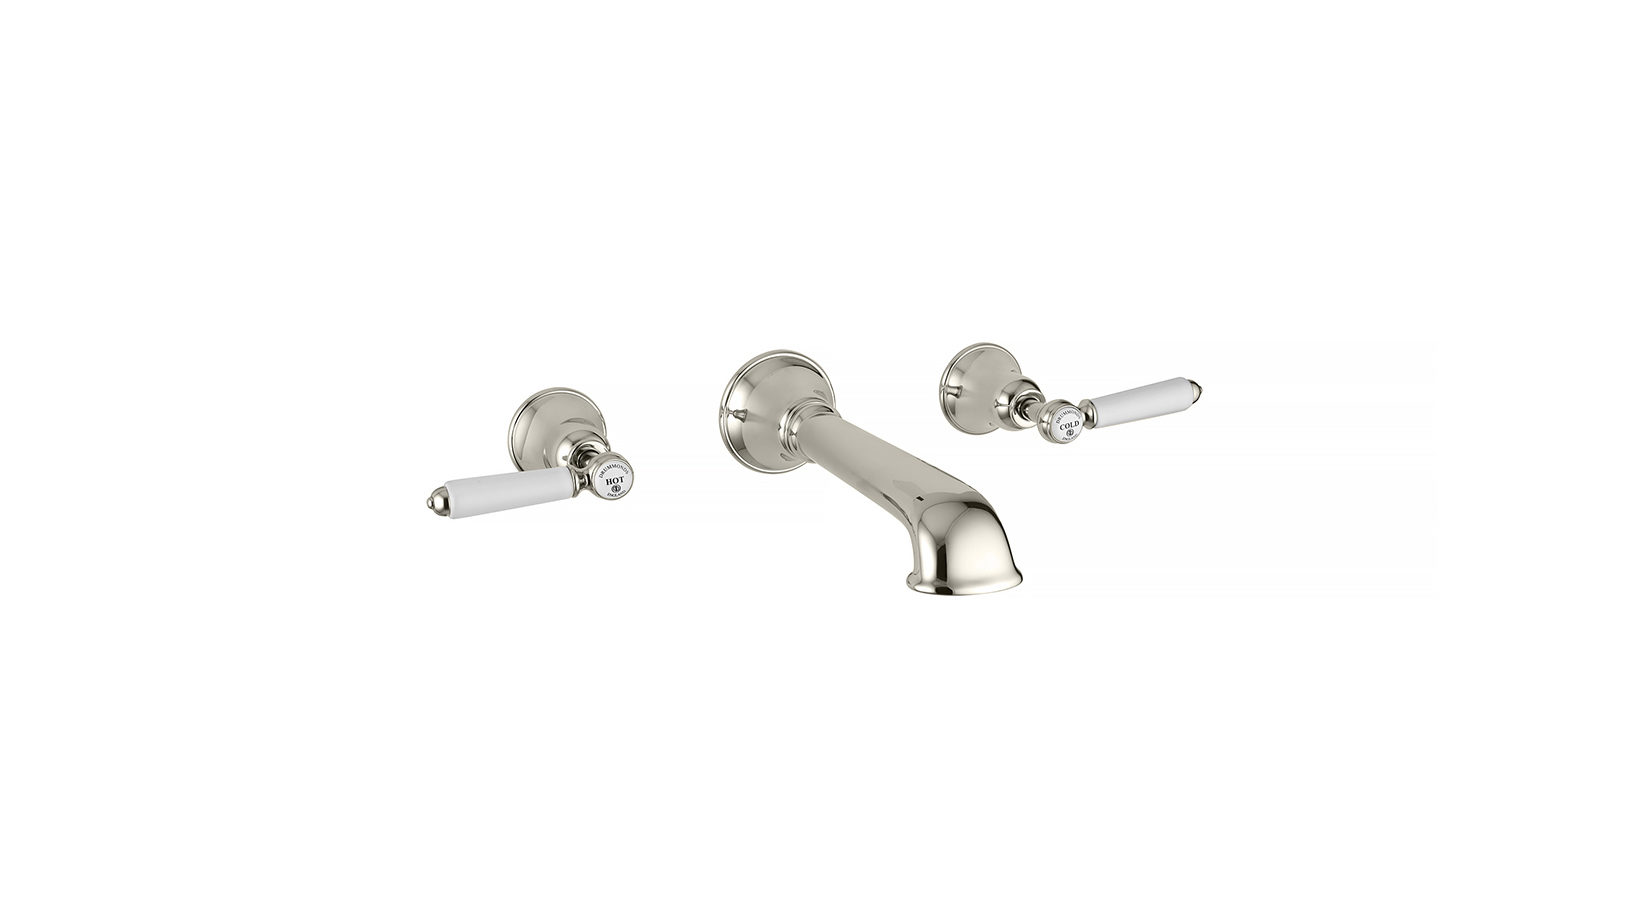 The Coll Lever Wall Mounted 3-Hole Bath Mixer